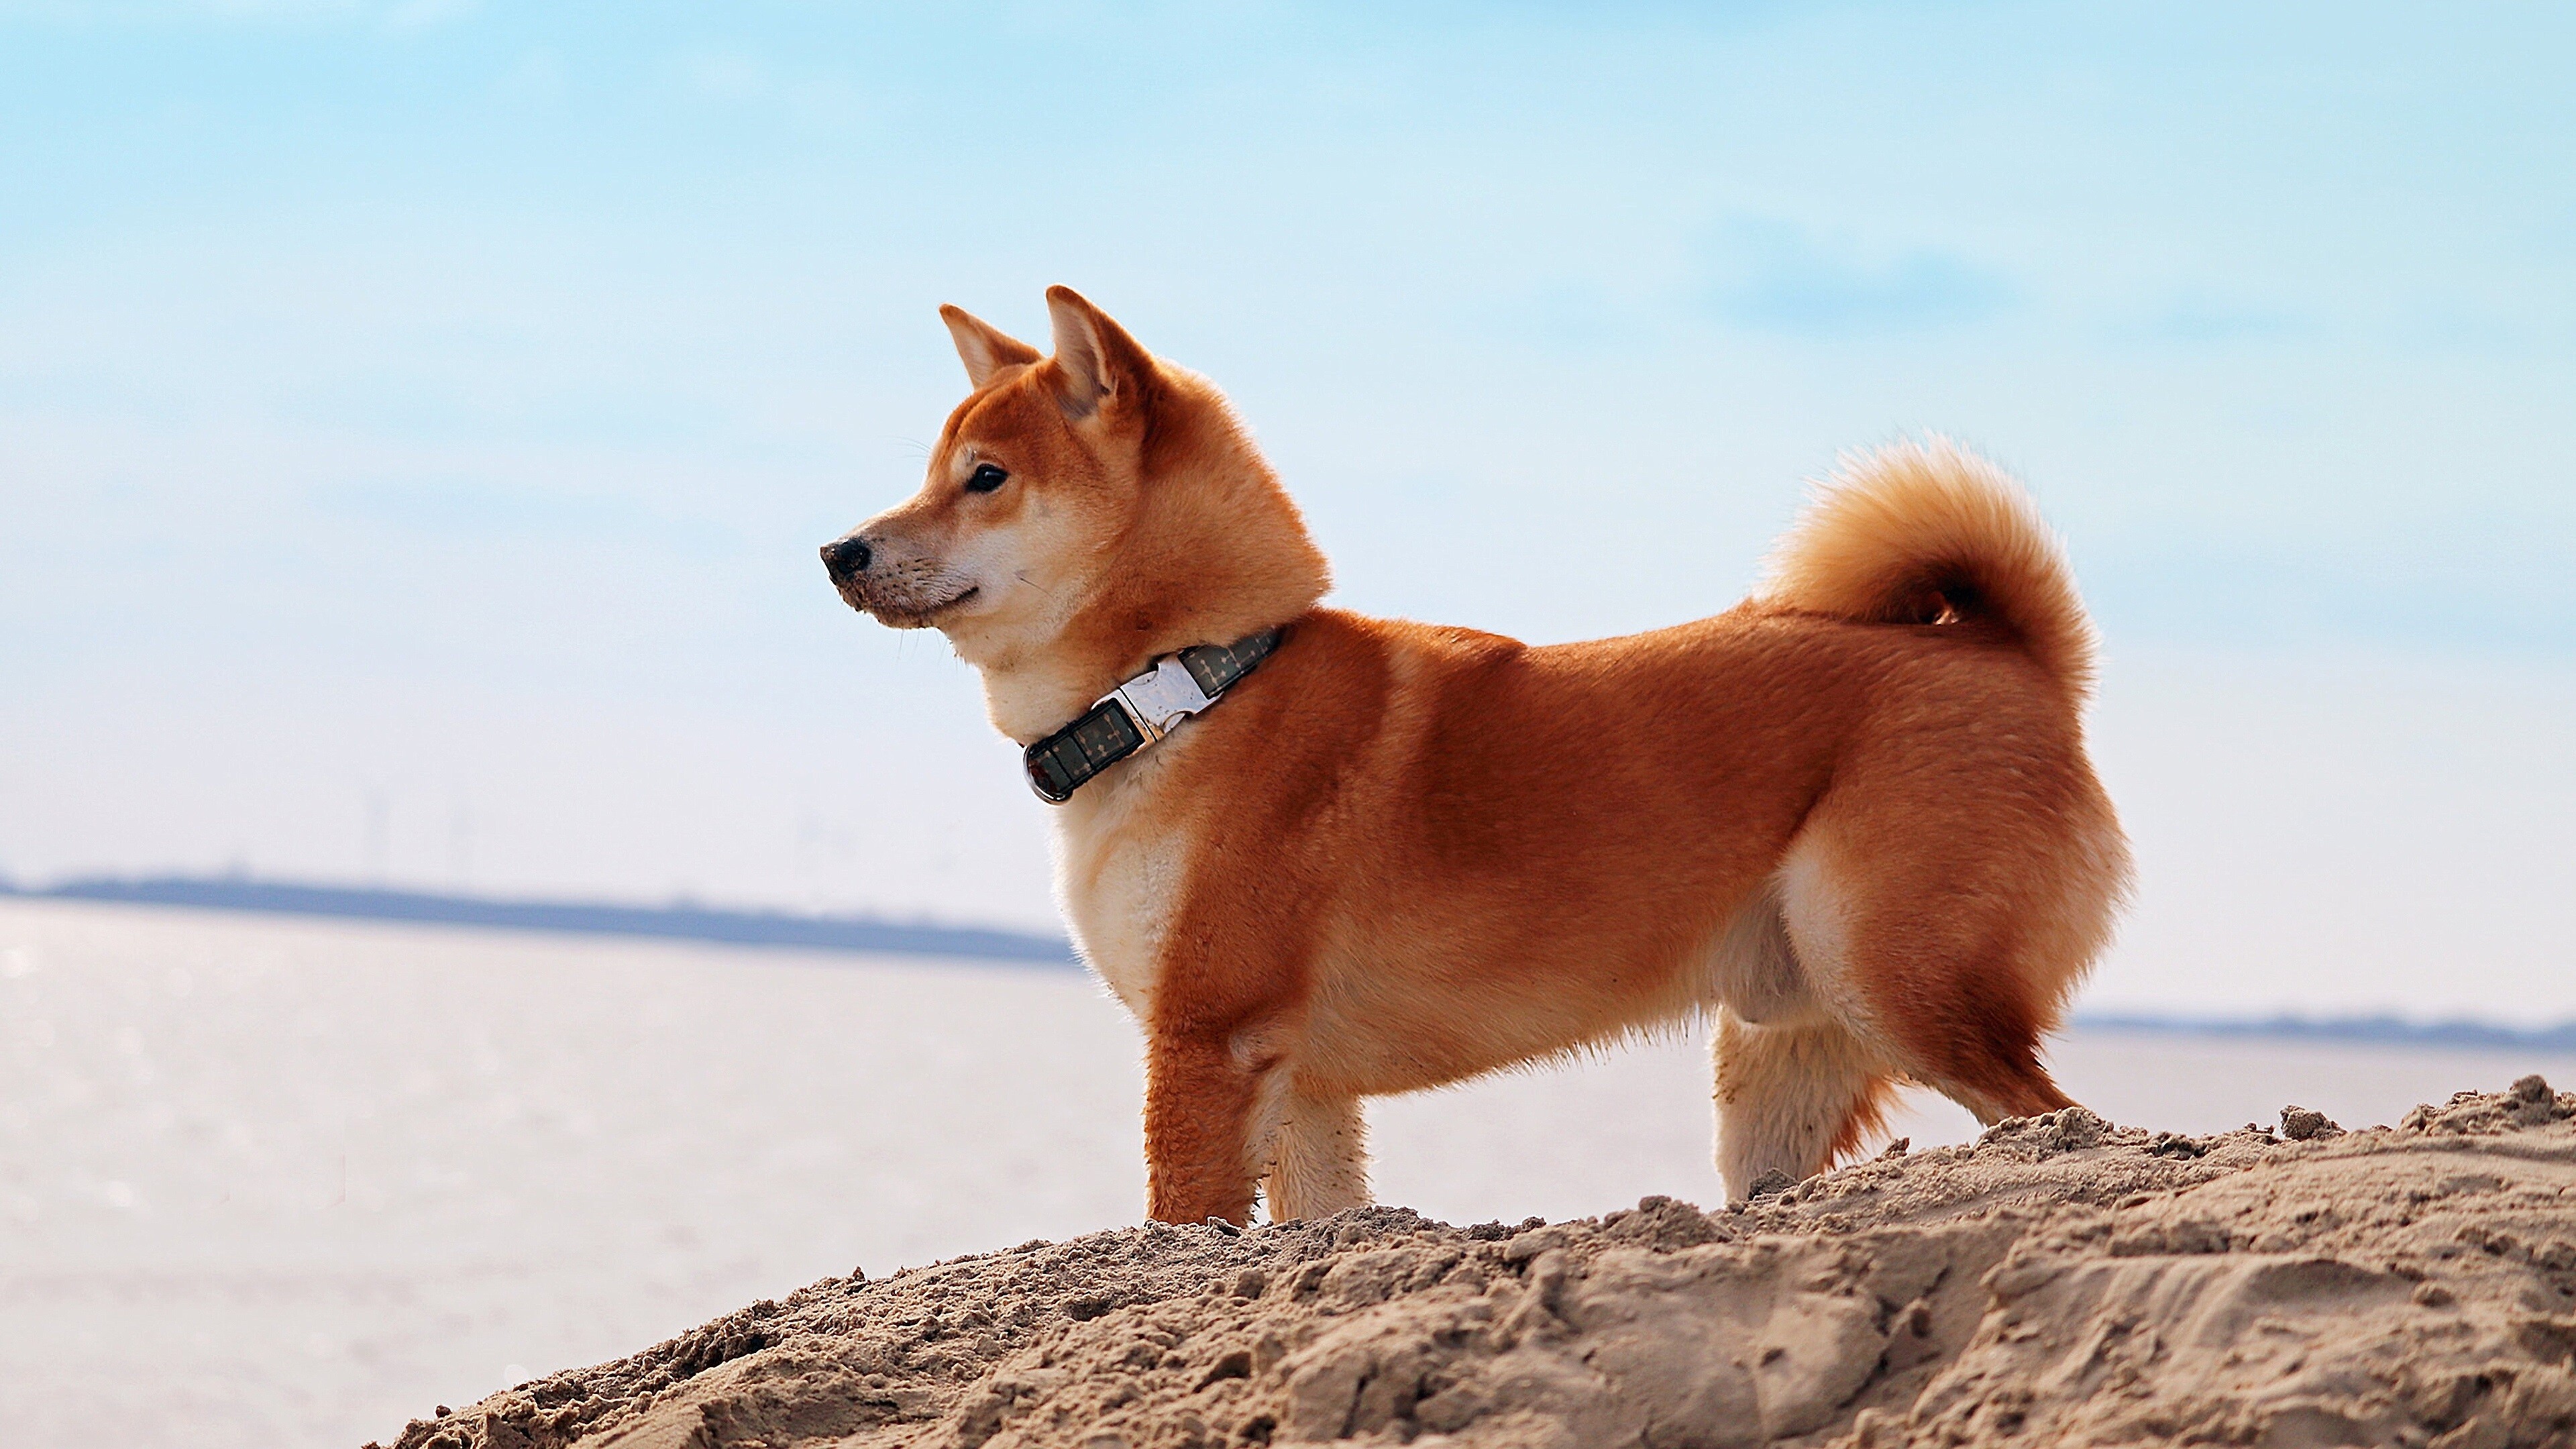 Shiba Inu: A breed of hunting dog from Japan, Terrestrial animal. 3840x2160 4K Wallpaper.